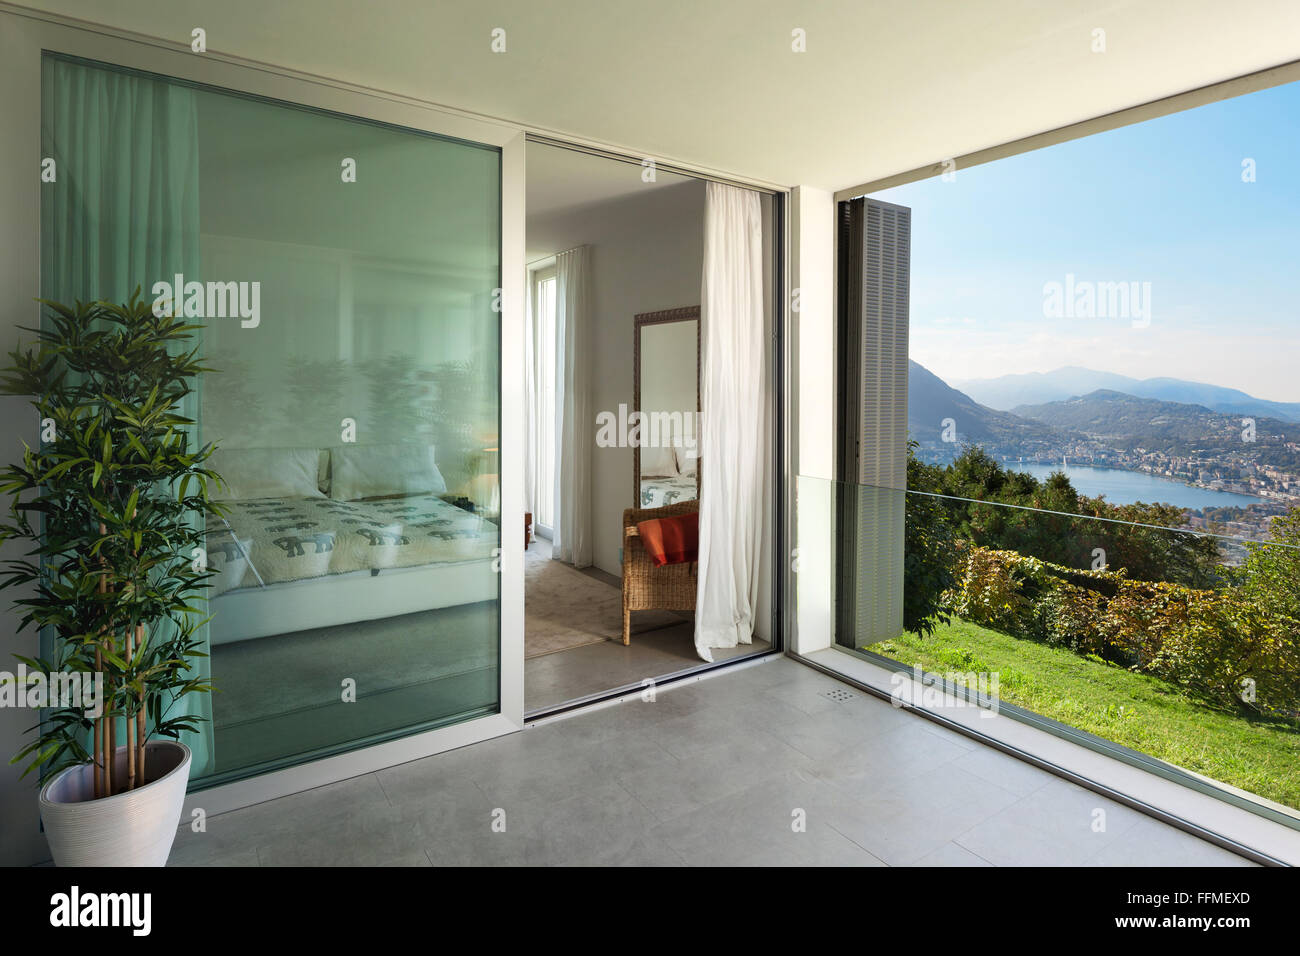 Interior of a modern house, balcony overlooking the lake Stock Photo